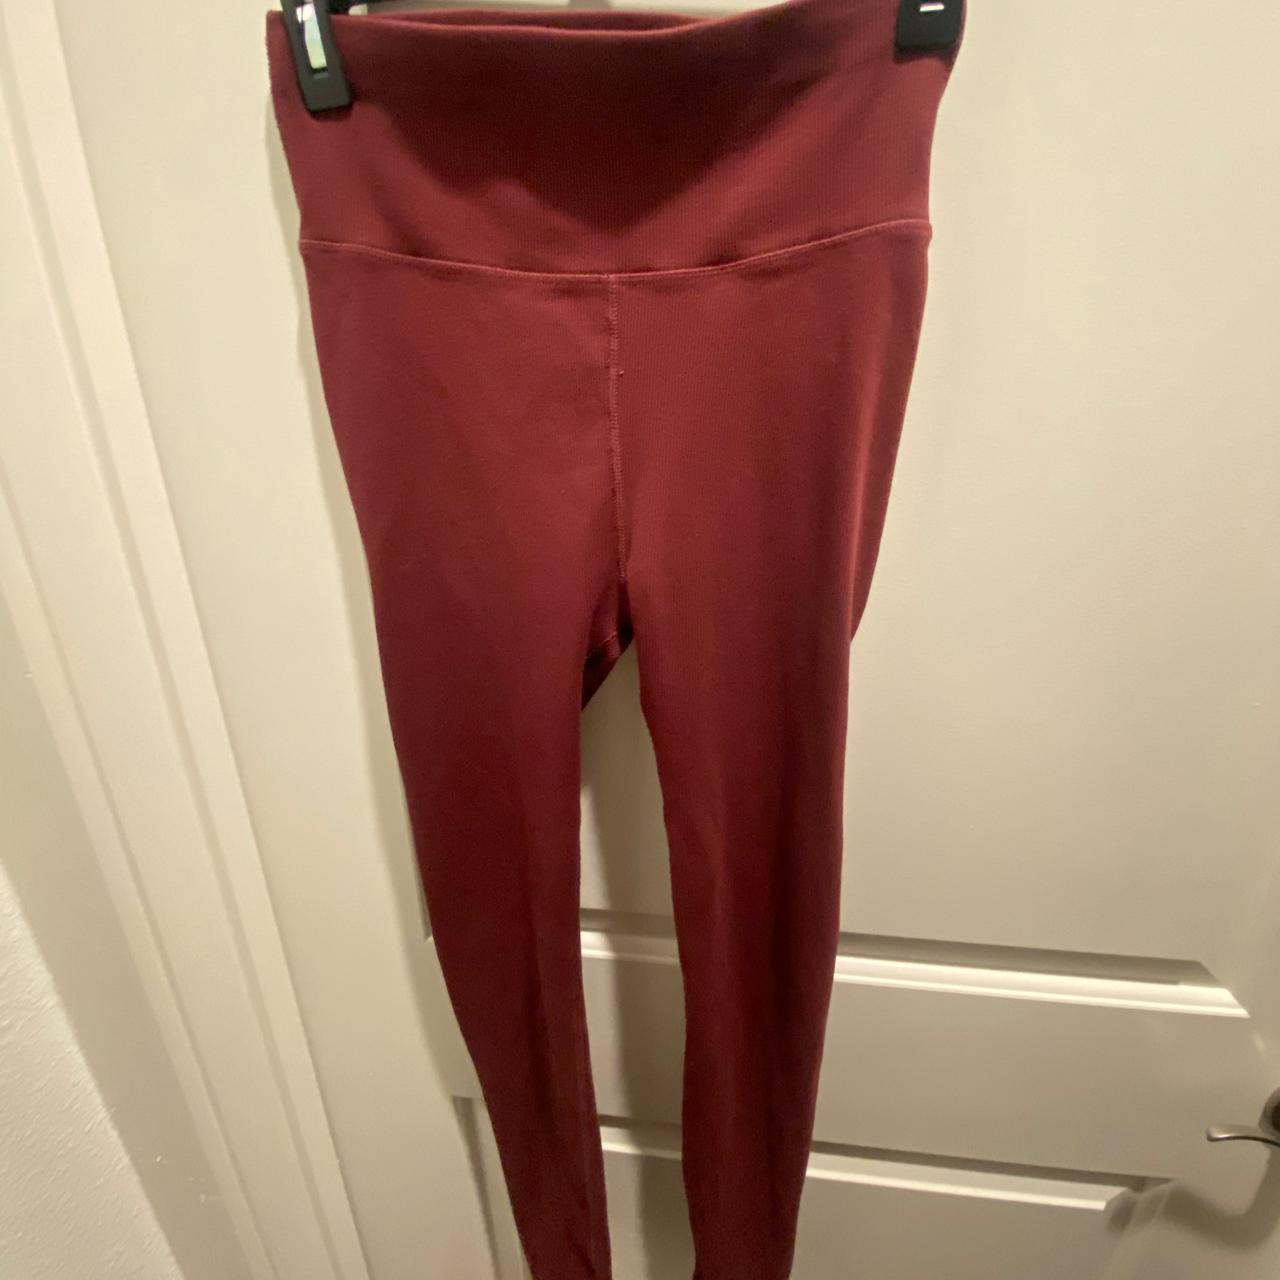 Pact Leggings, Size M, Burgundy Ribbed, Never been - Depop